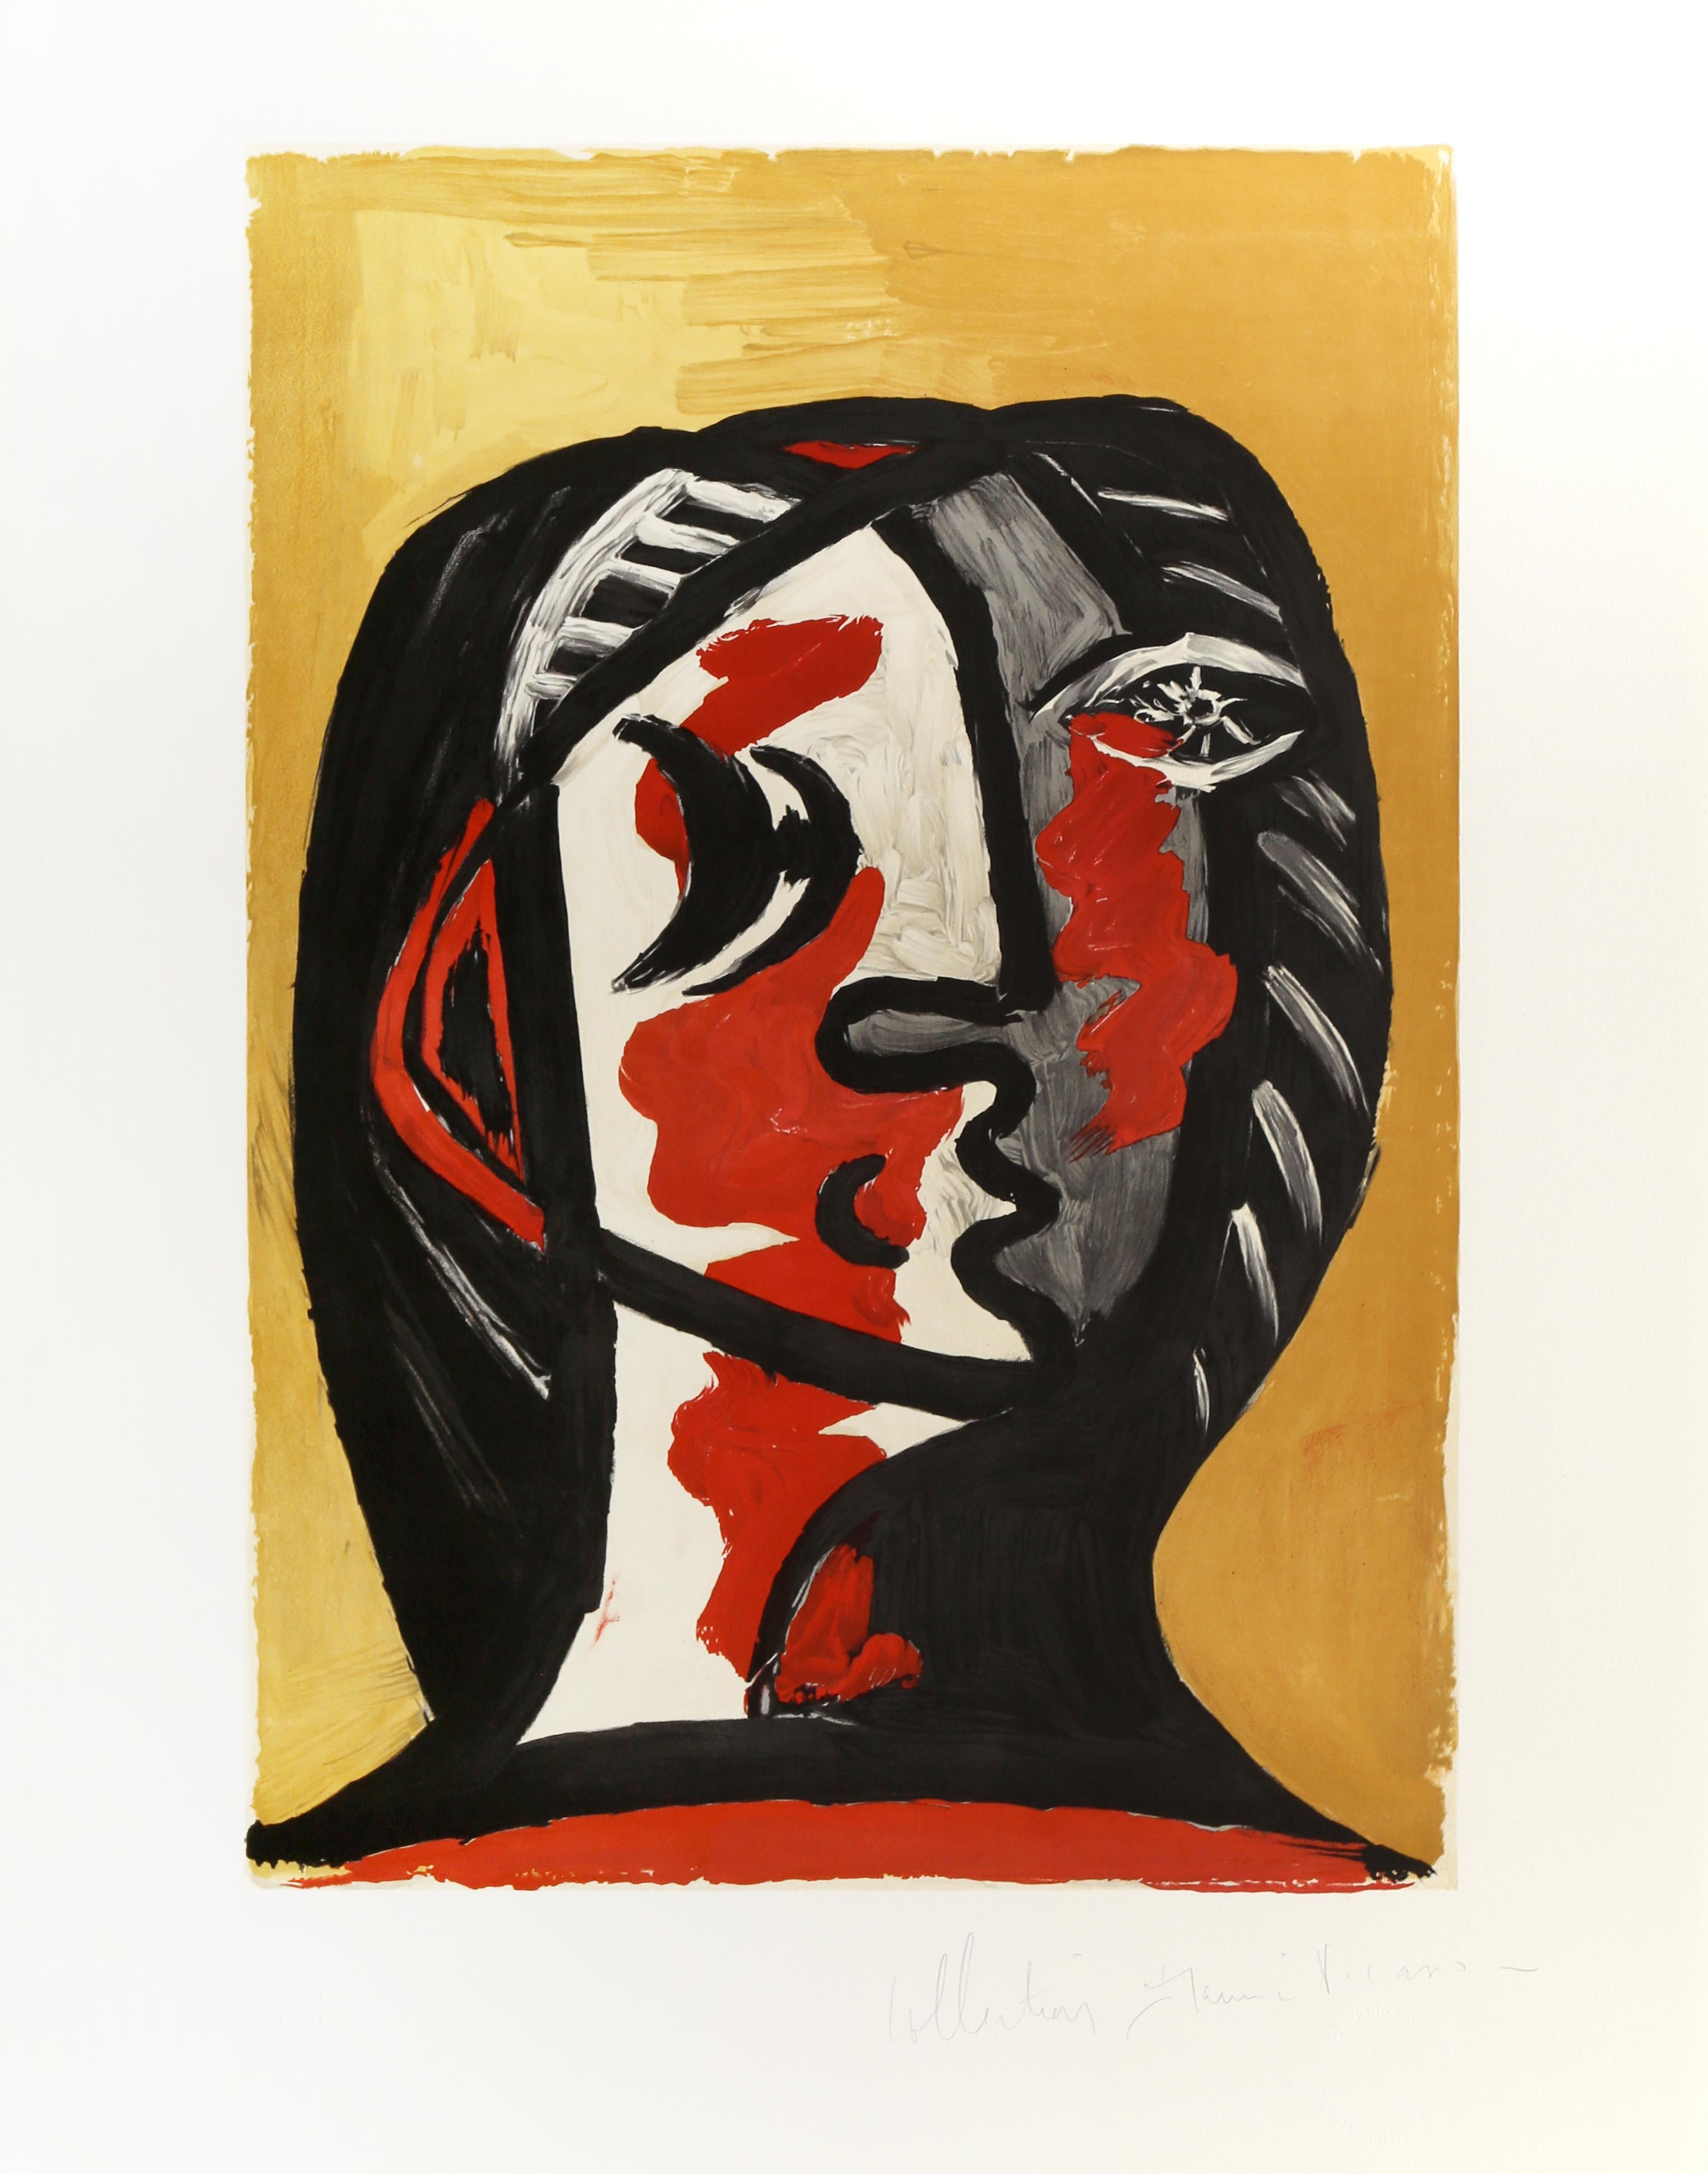 Rendered in bold hues of red and mustard with shading in black, this Pablo Picasso portrait relies on thick, dark lines to shape the face of the woman shown. Accented by the flowing red and even pops of off-white, the lack of true perspective in the